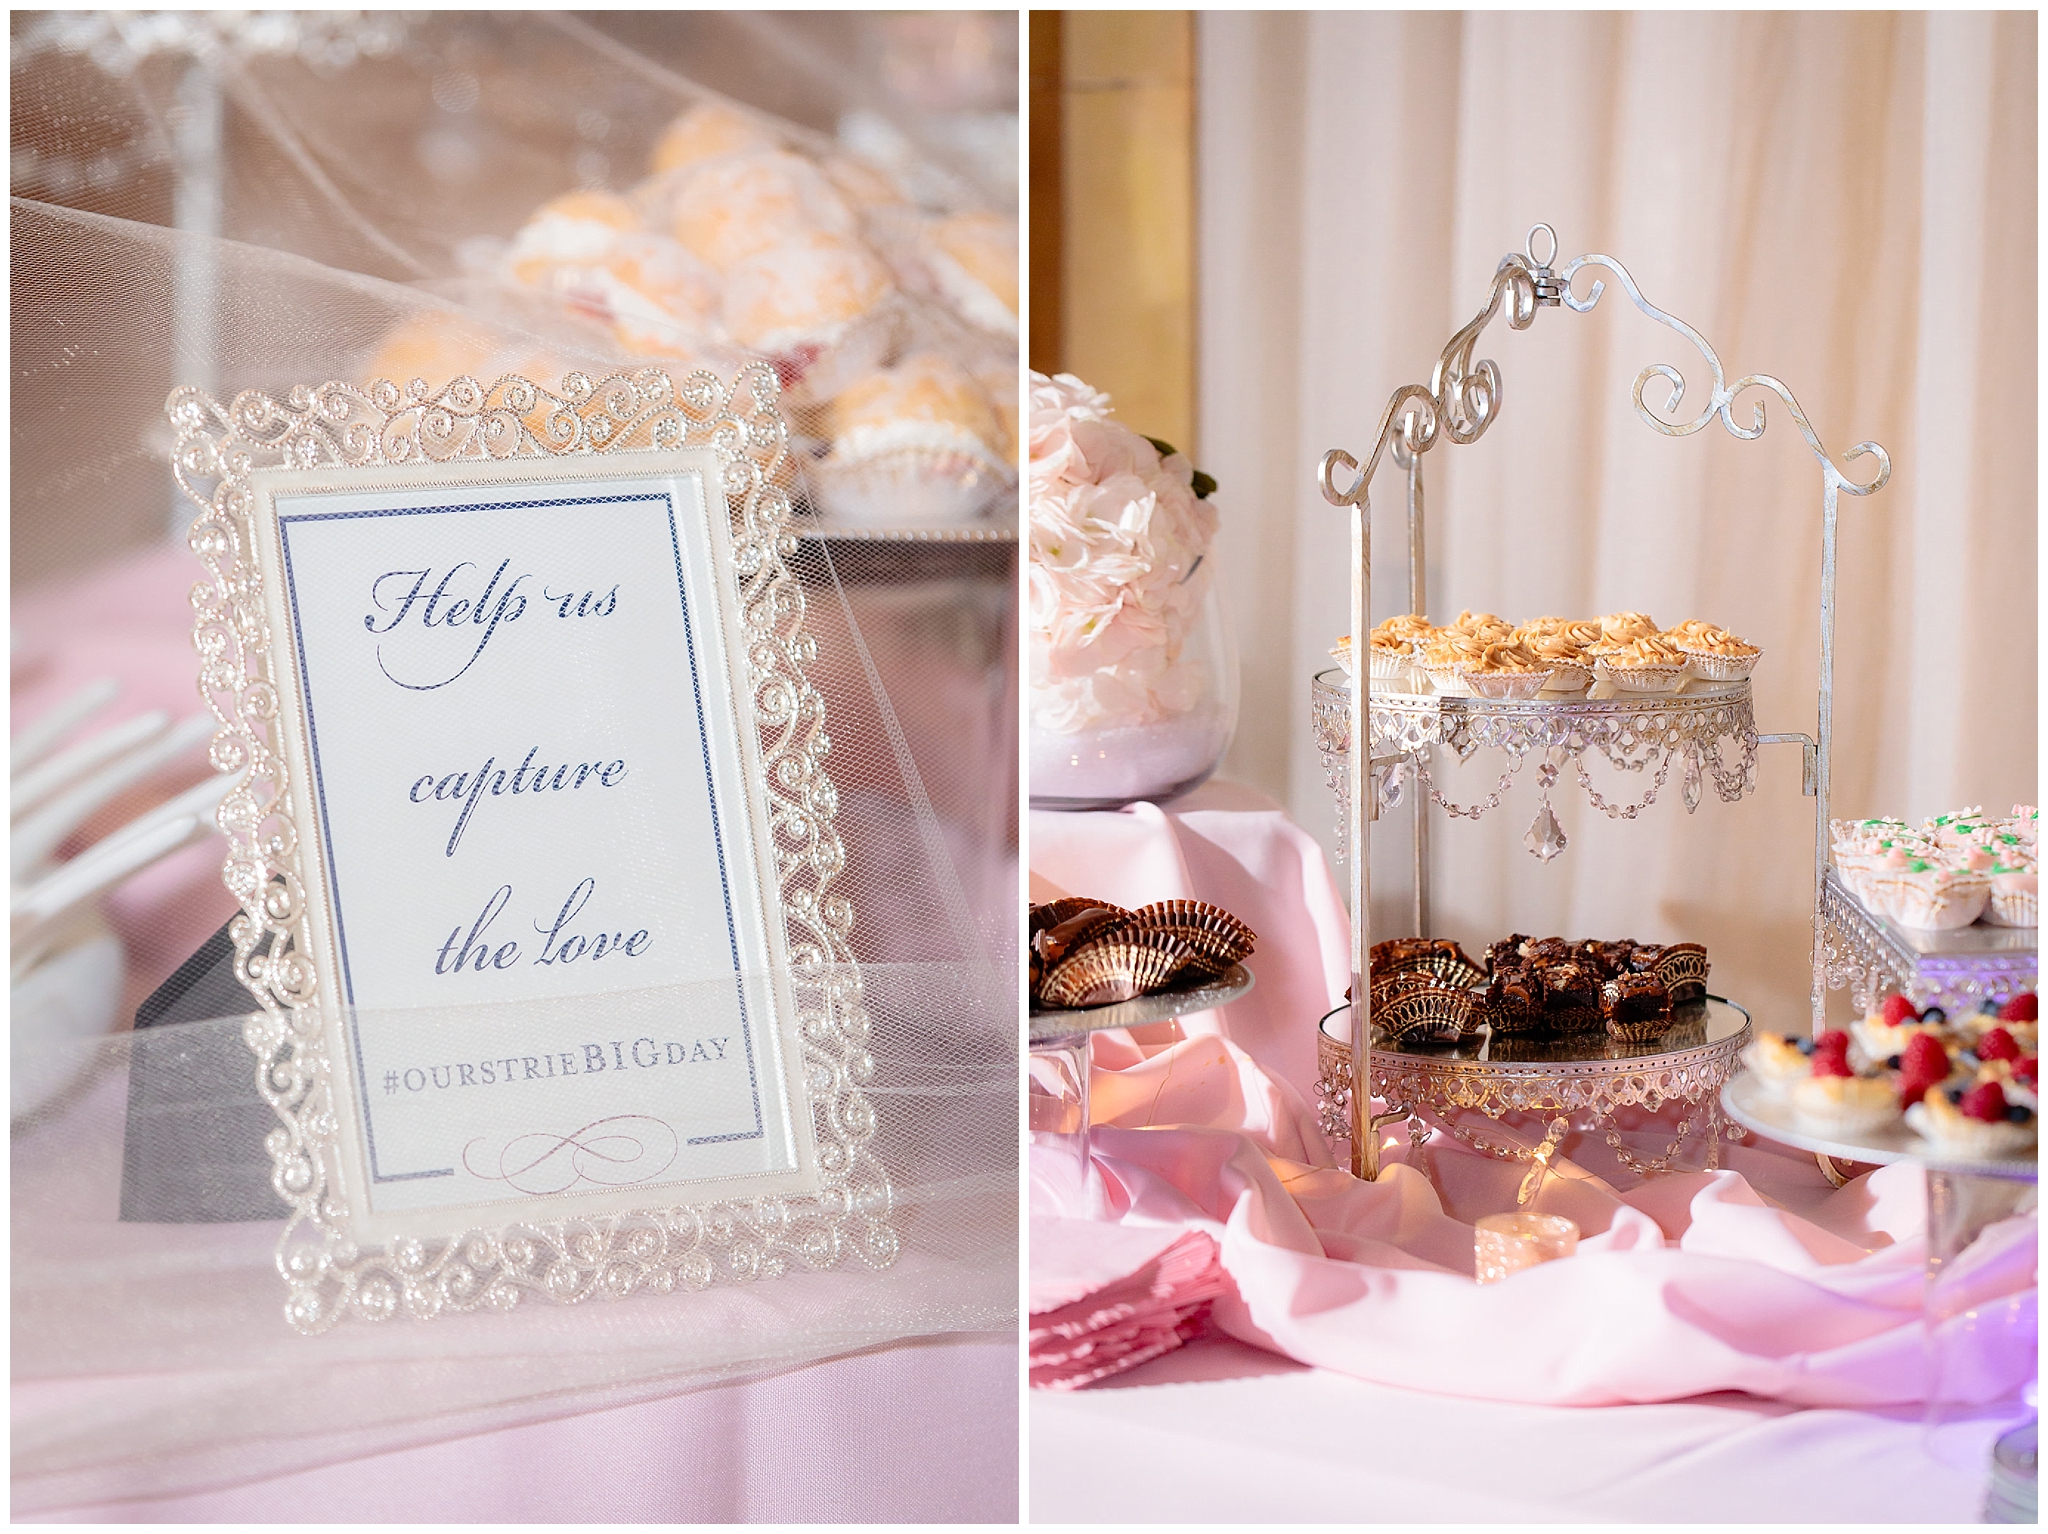 Cookie table done by Rania's Catering at a reception at The Pennsylvanian